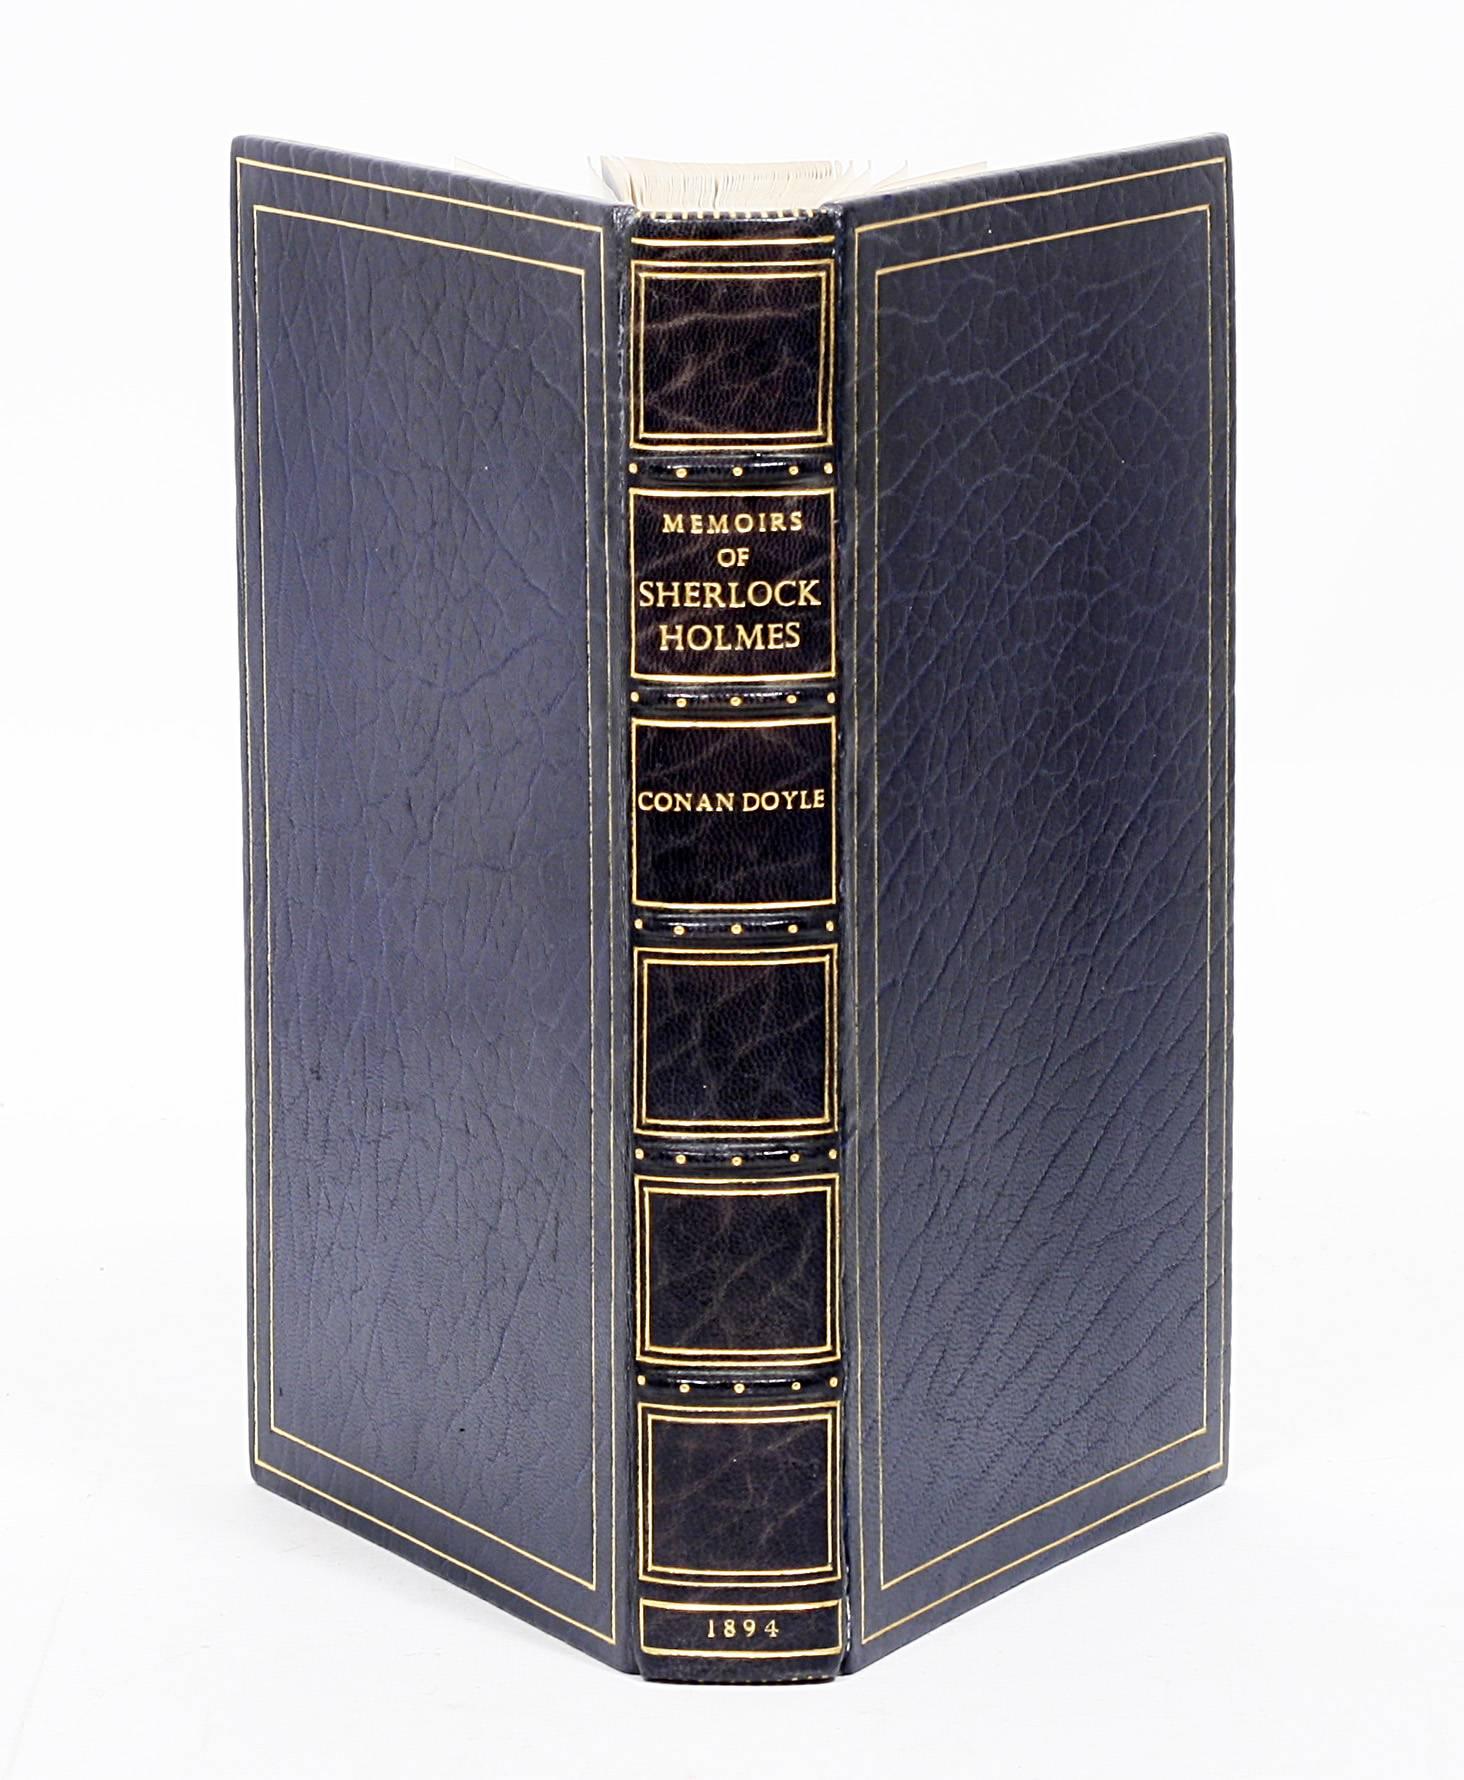 First edition of Doyle’s second, and arguably greatest, collection of Sherlock Holmes stories, with 90 illustrations by Sidney Paget. In stunning early morocco binding by George Bayntun.

Beginning with “The Adventure of Silver Blaze”, the